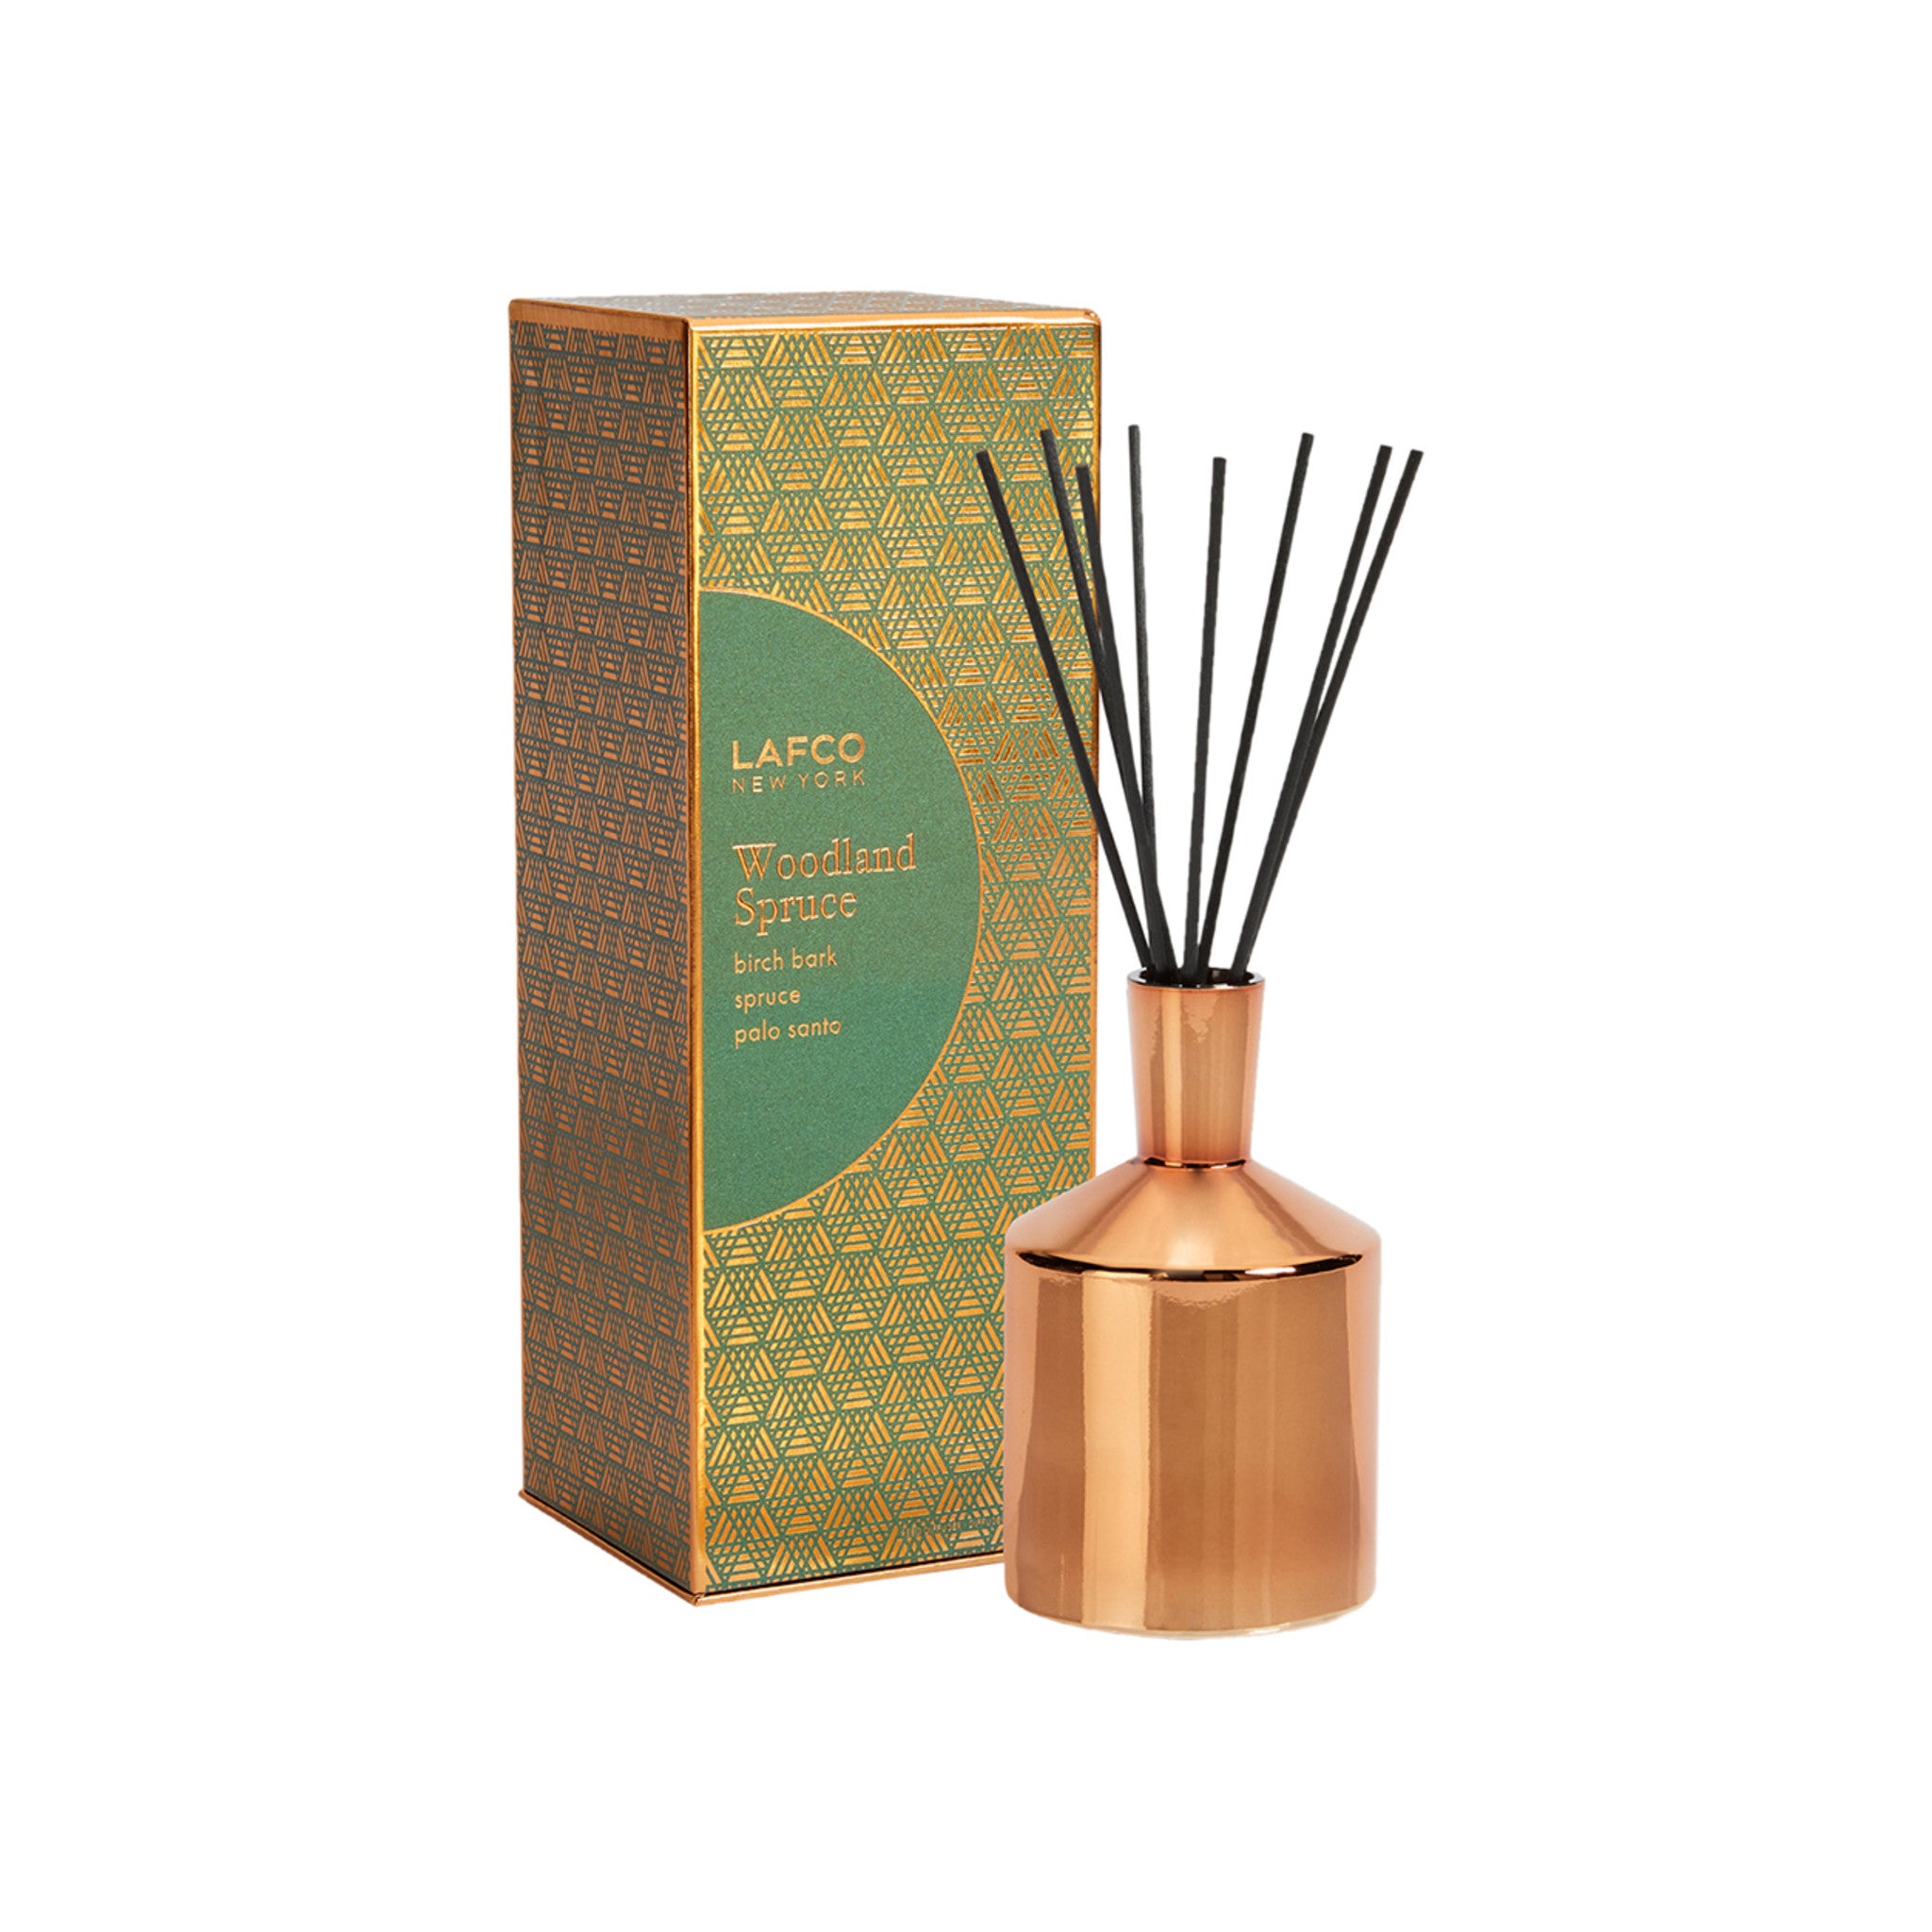 Lafco Woodland Spruce Classic Diffuser main image.